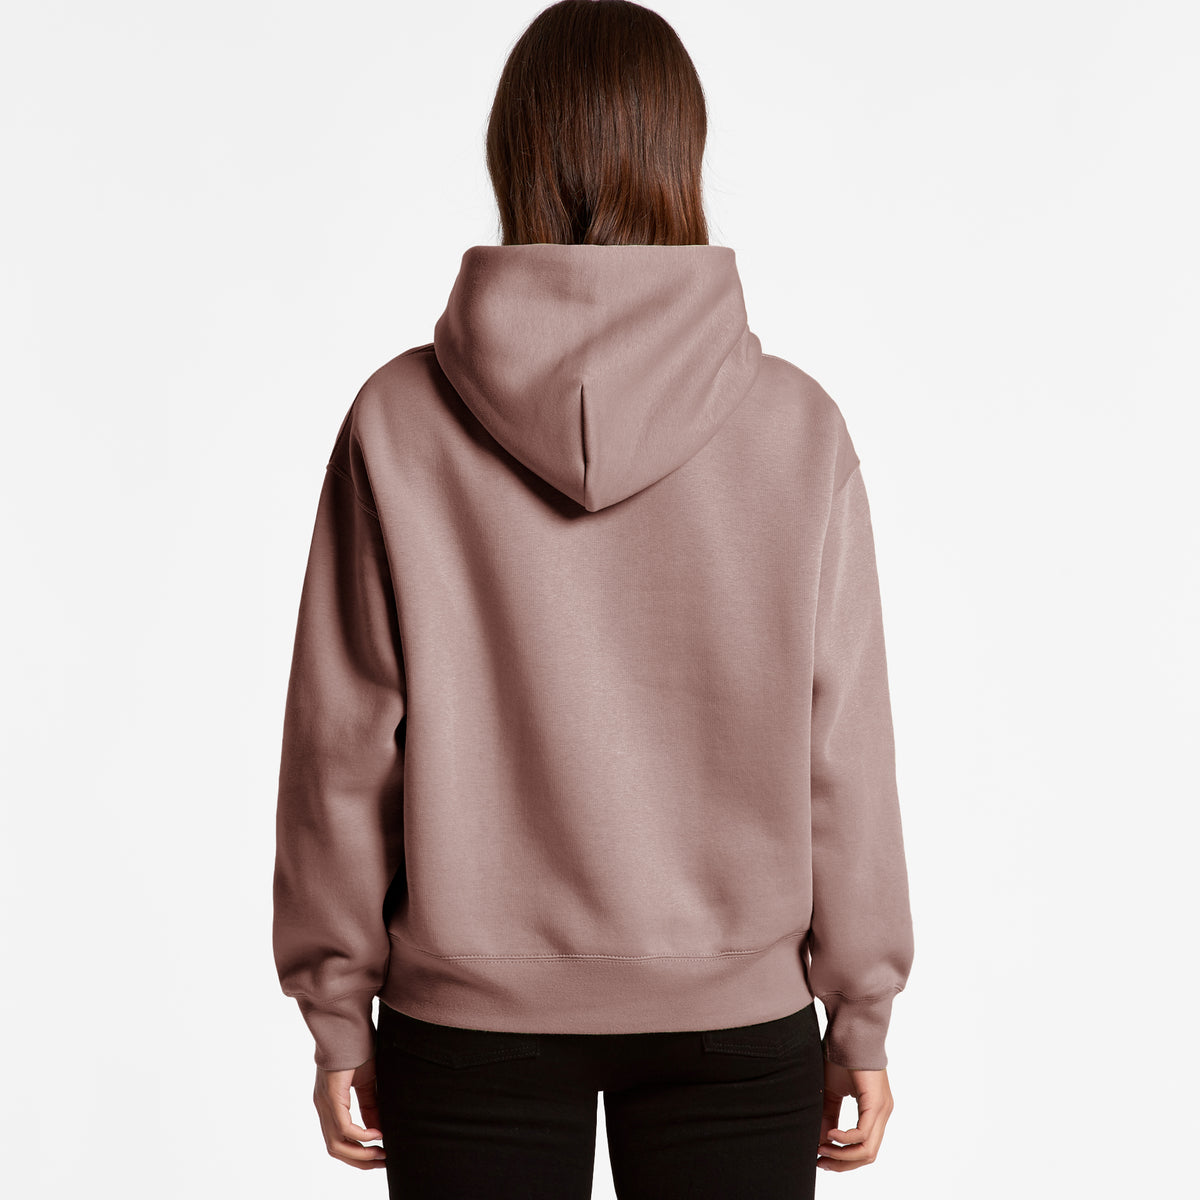 Half Dome - Yosemite National Park - Women&#39;s Heavyweight Relaxed Hoodie